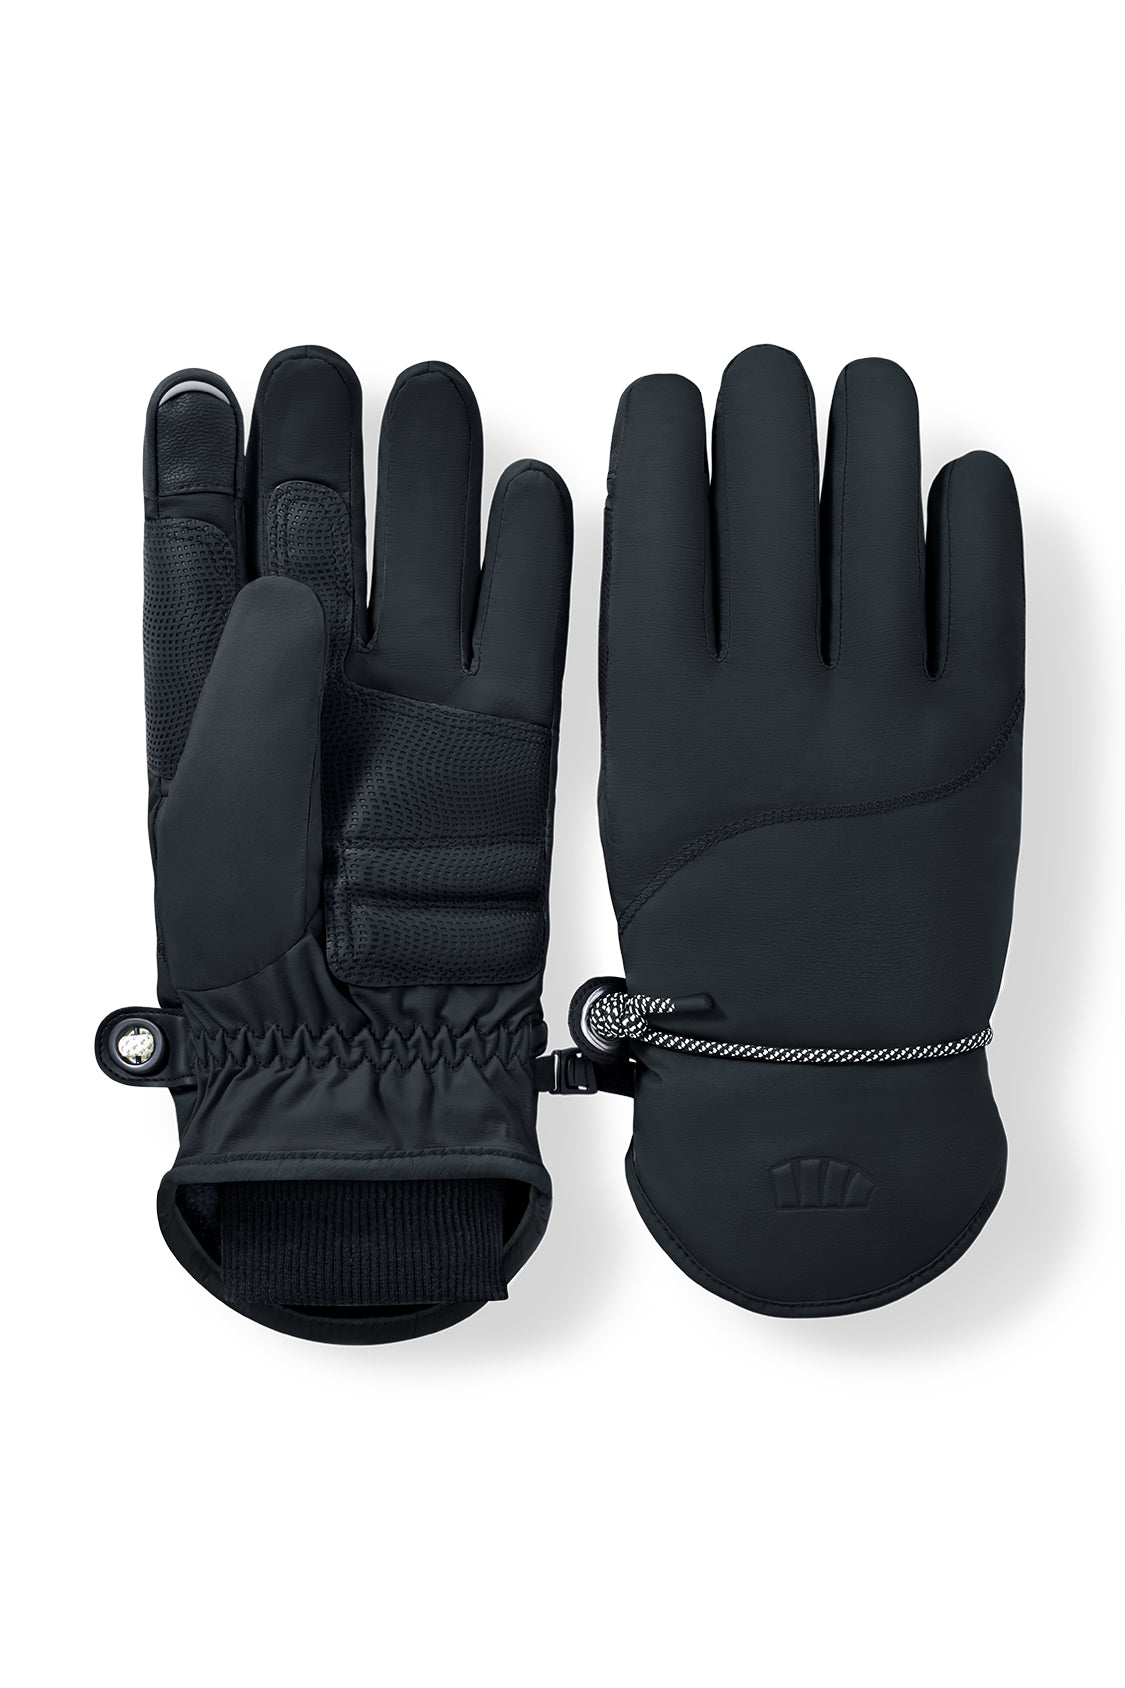 Beneunder Winter Touch Screen Windproof Thermal Glove 